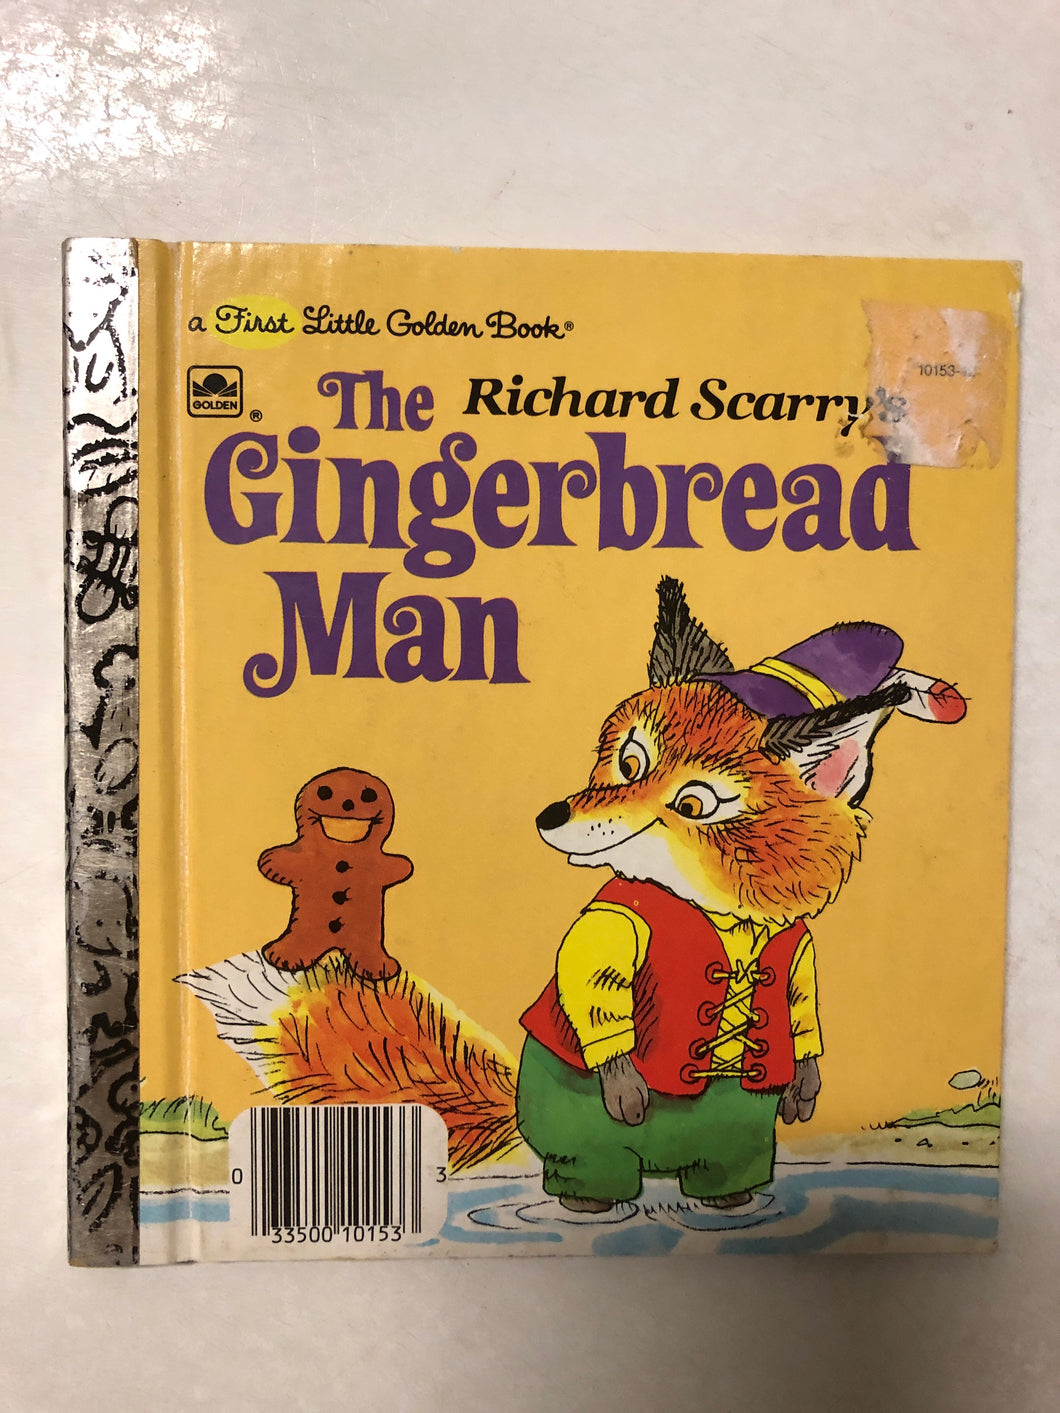 Richard Scarry’s The Gingerbread Man - Slick Cat Books 